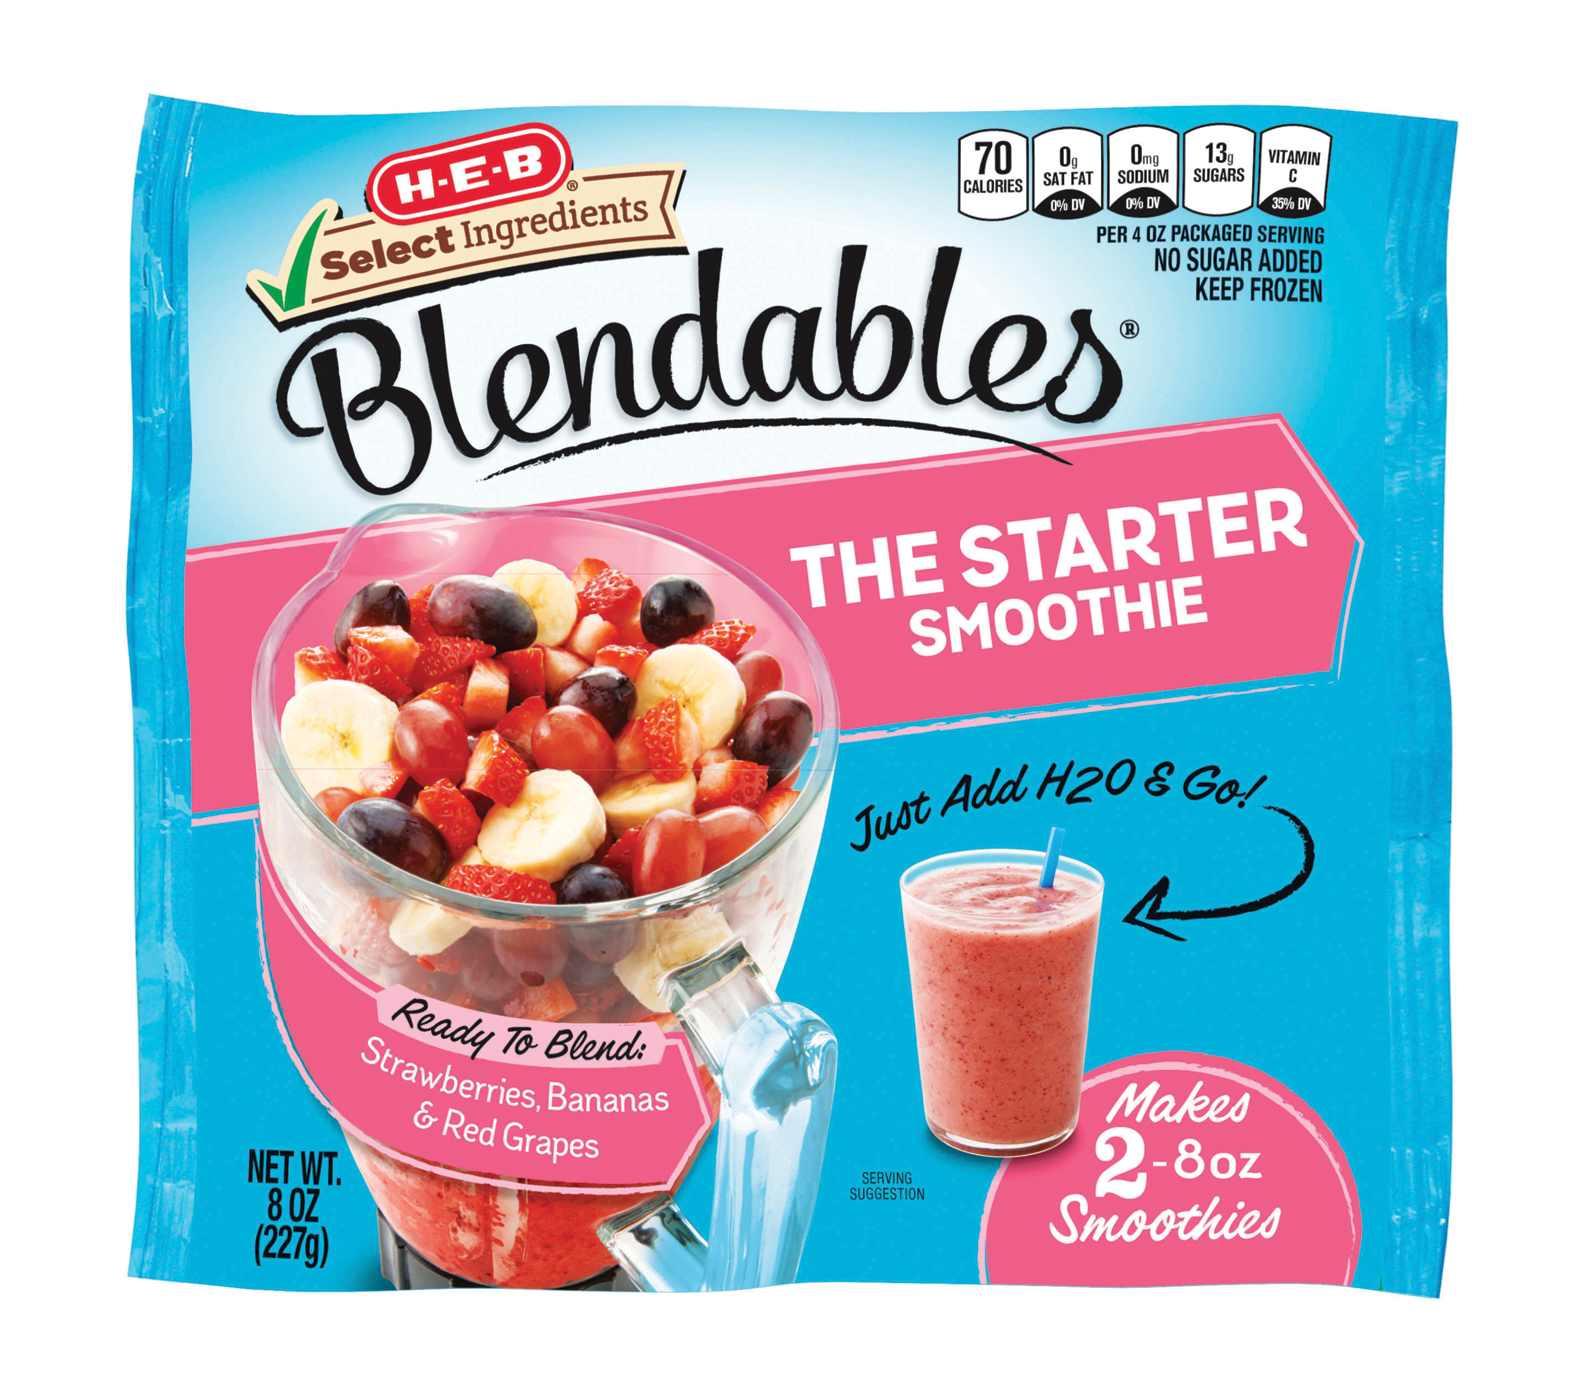 H-E-B Blendables The Starter Smoothie; image 1 of 2